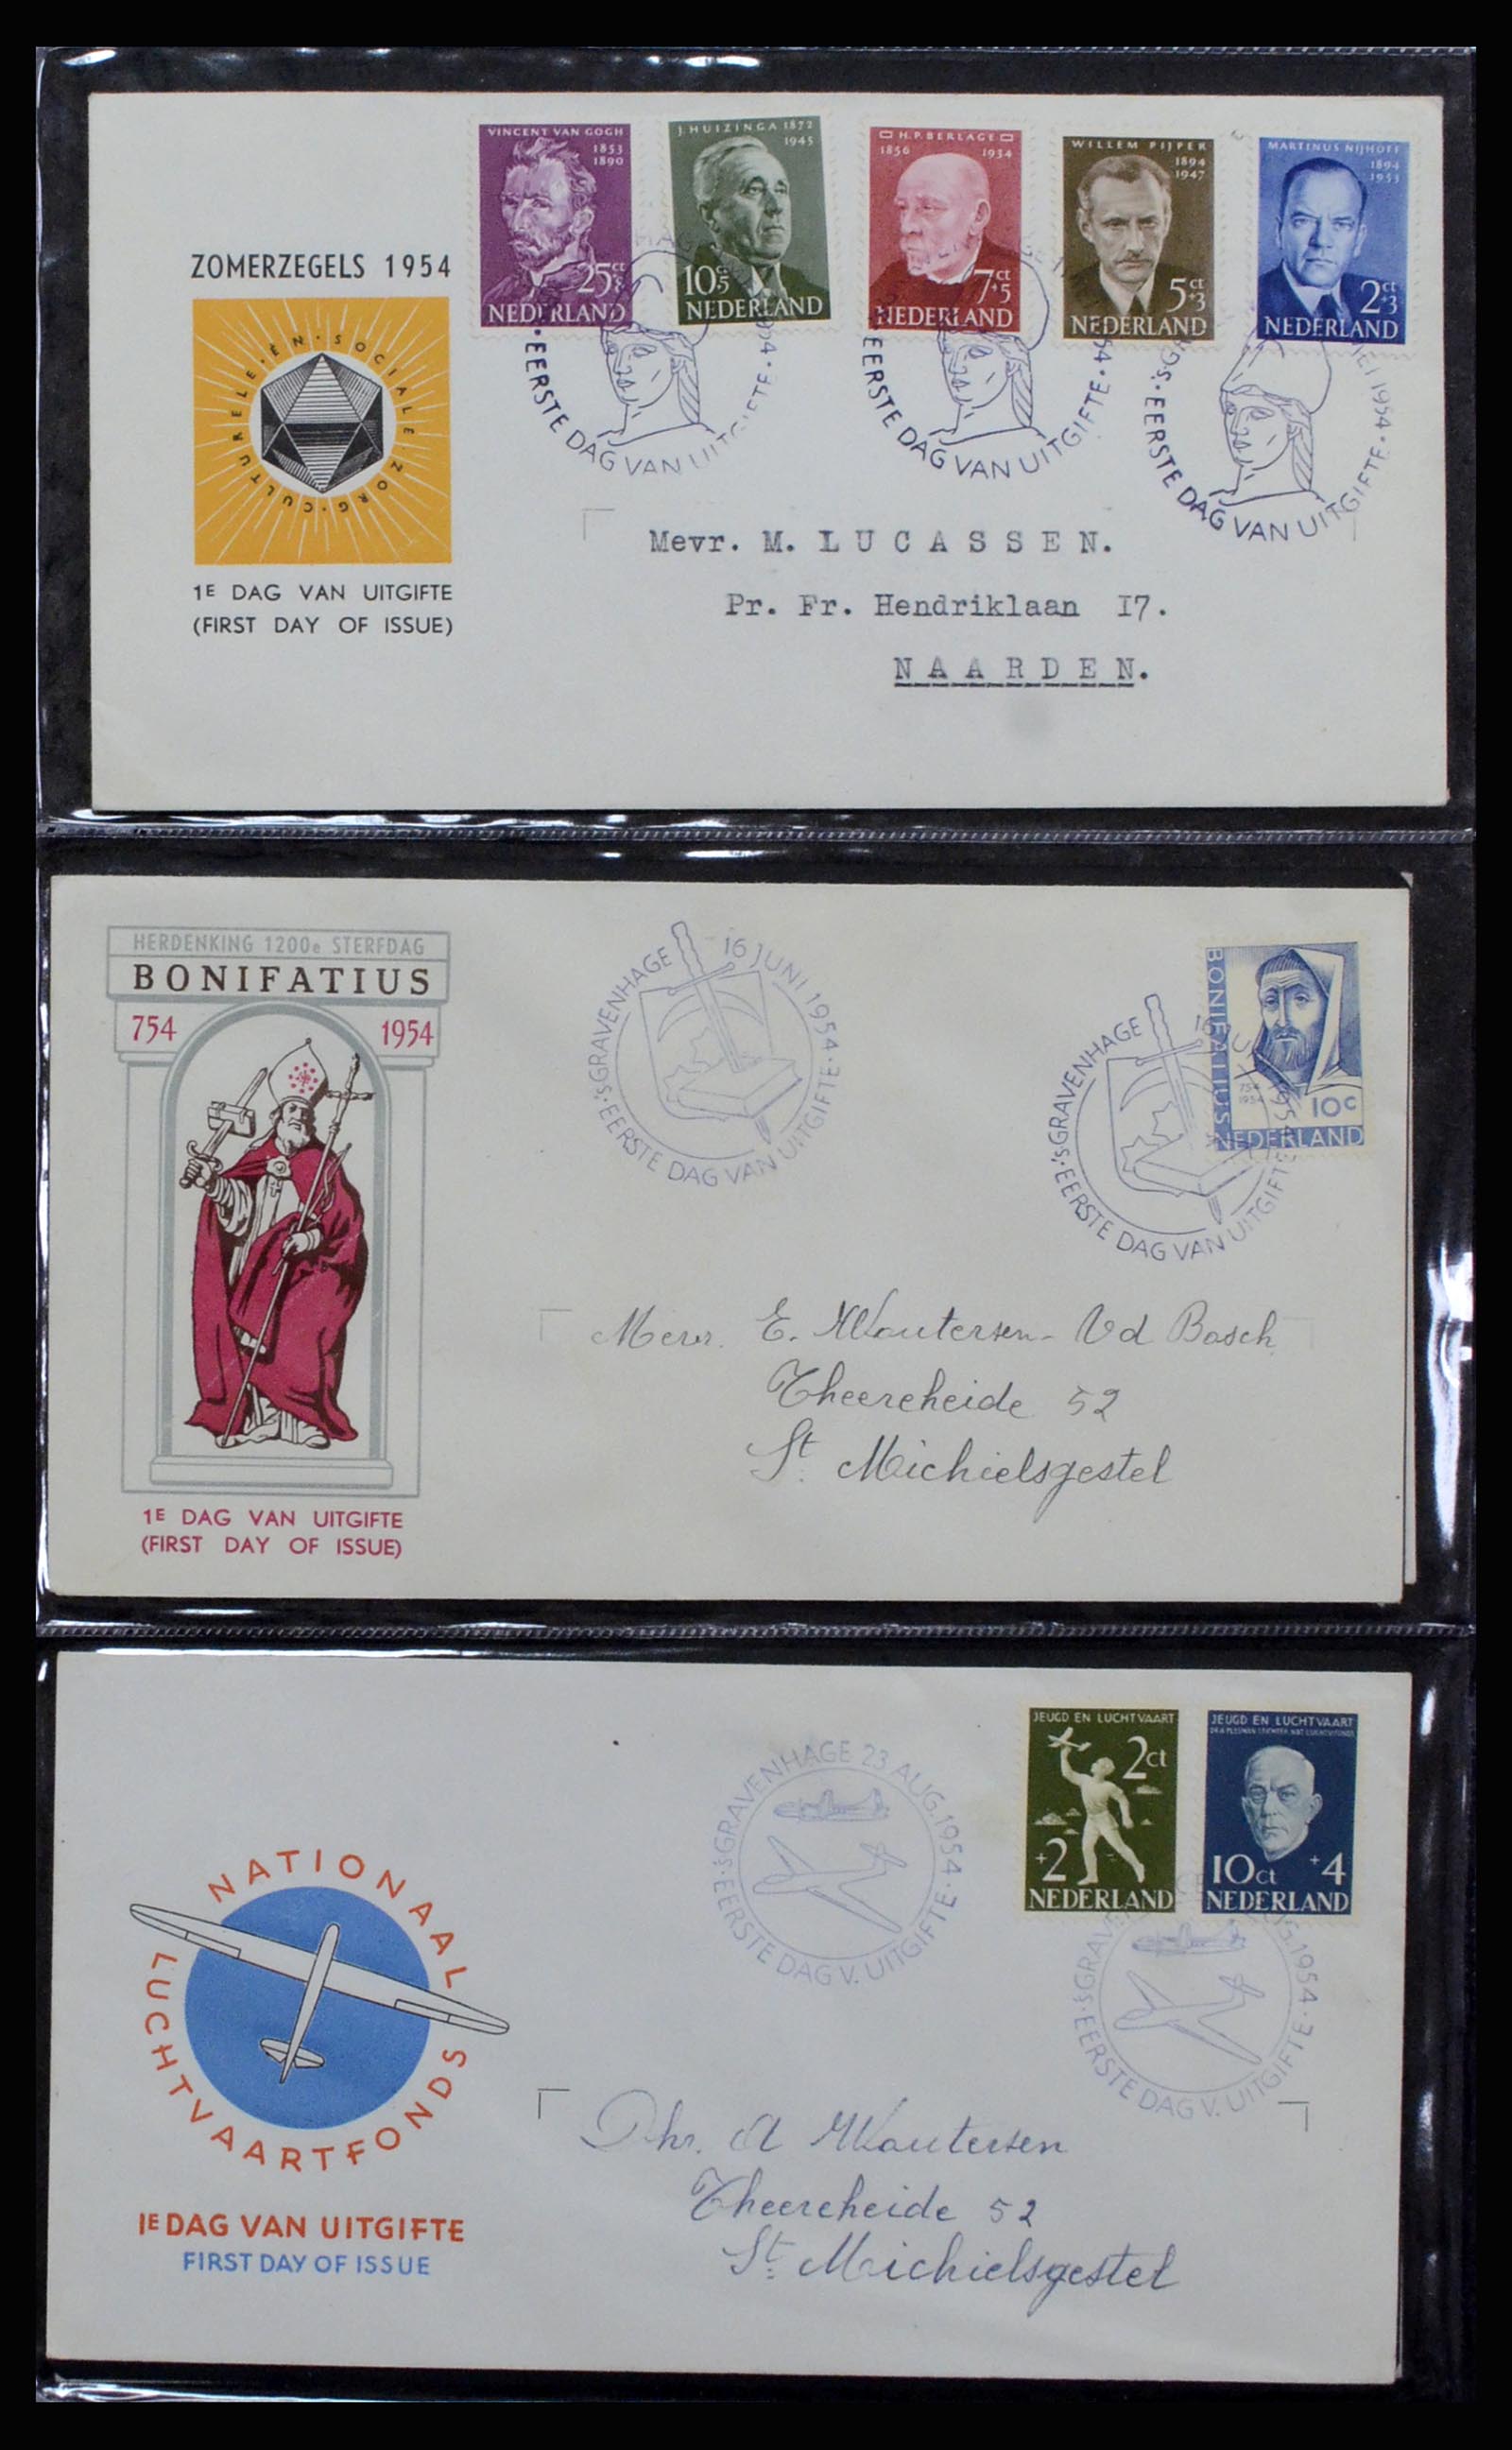 37197 007 - Stamp collection 37197 Netherlands FDC's 1950-2004.